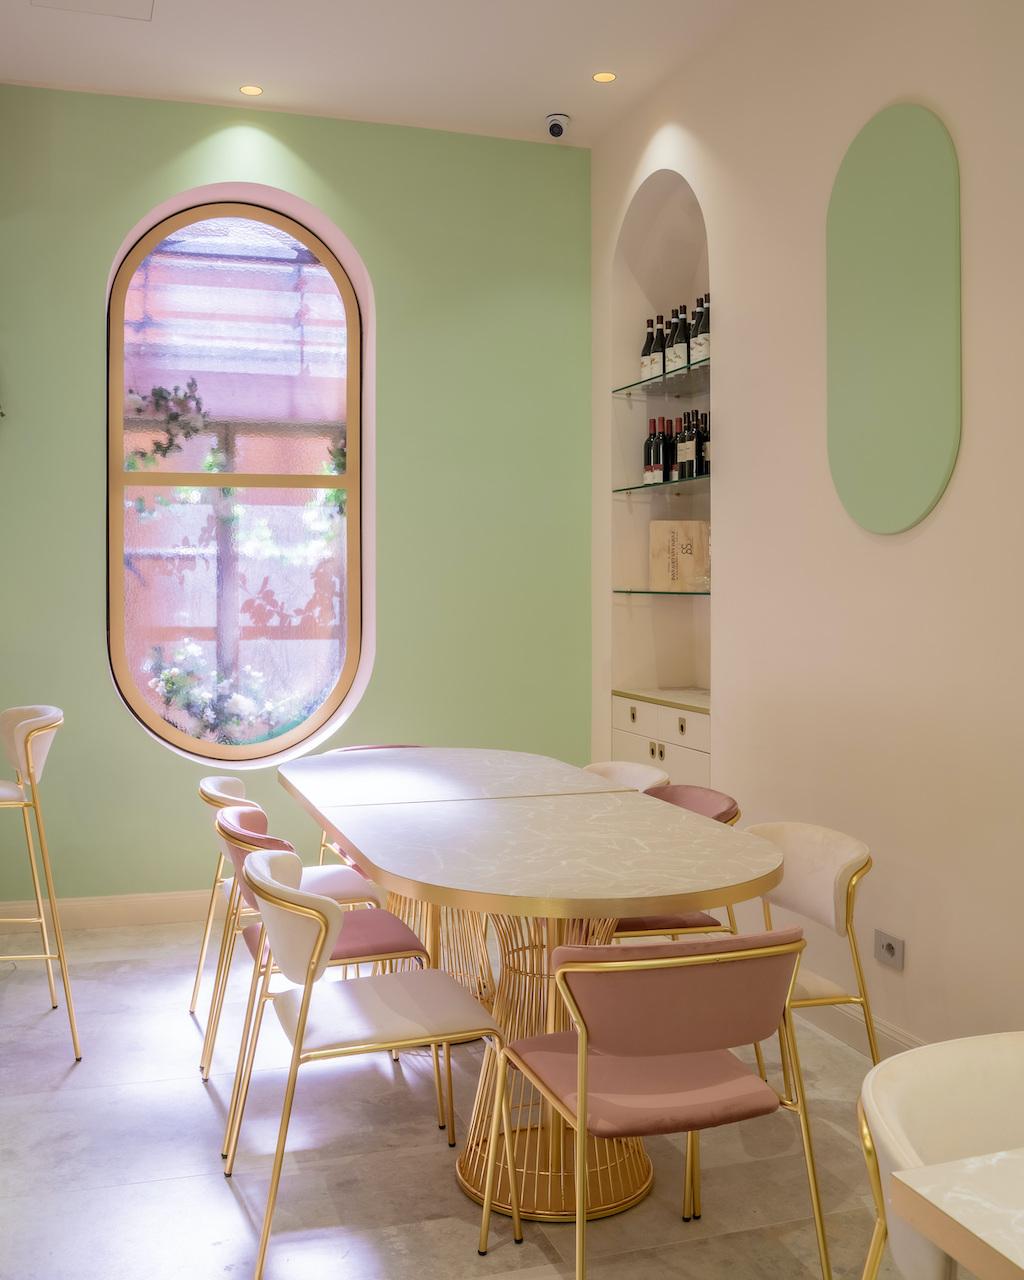 Linfa Milano – Eat Different brings old-world charm to Milan